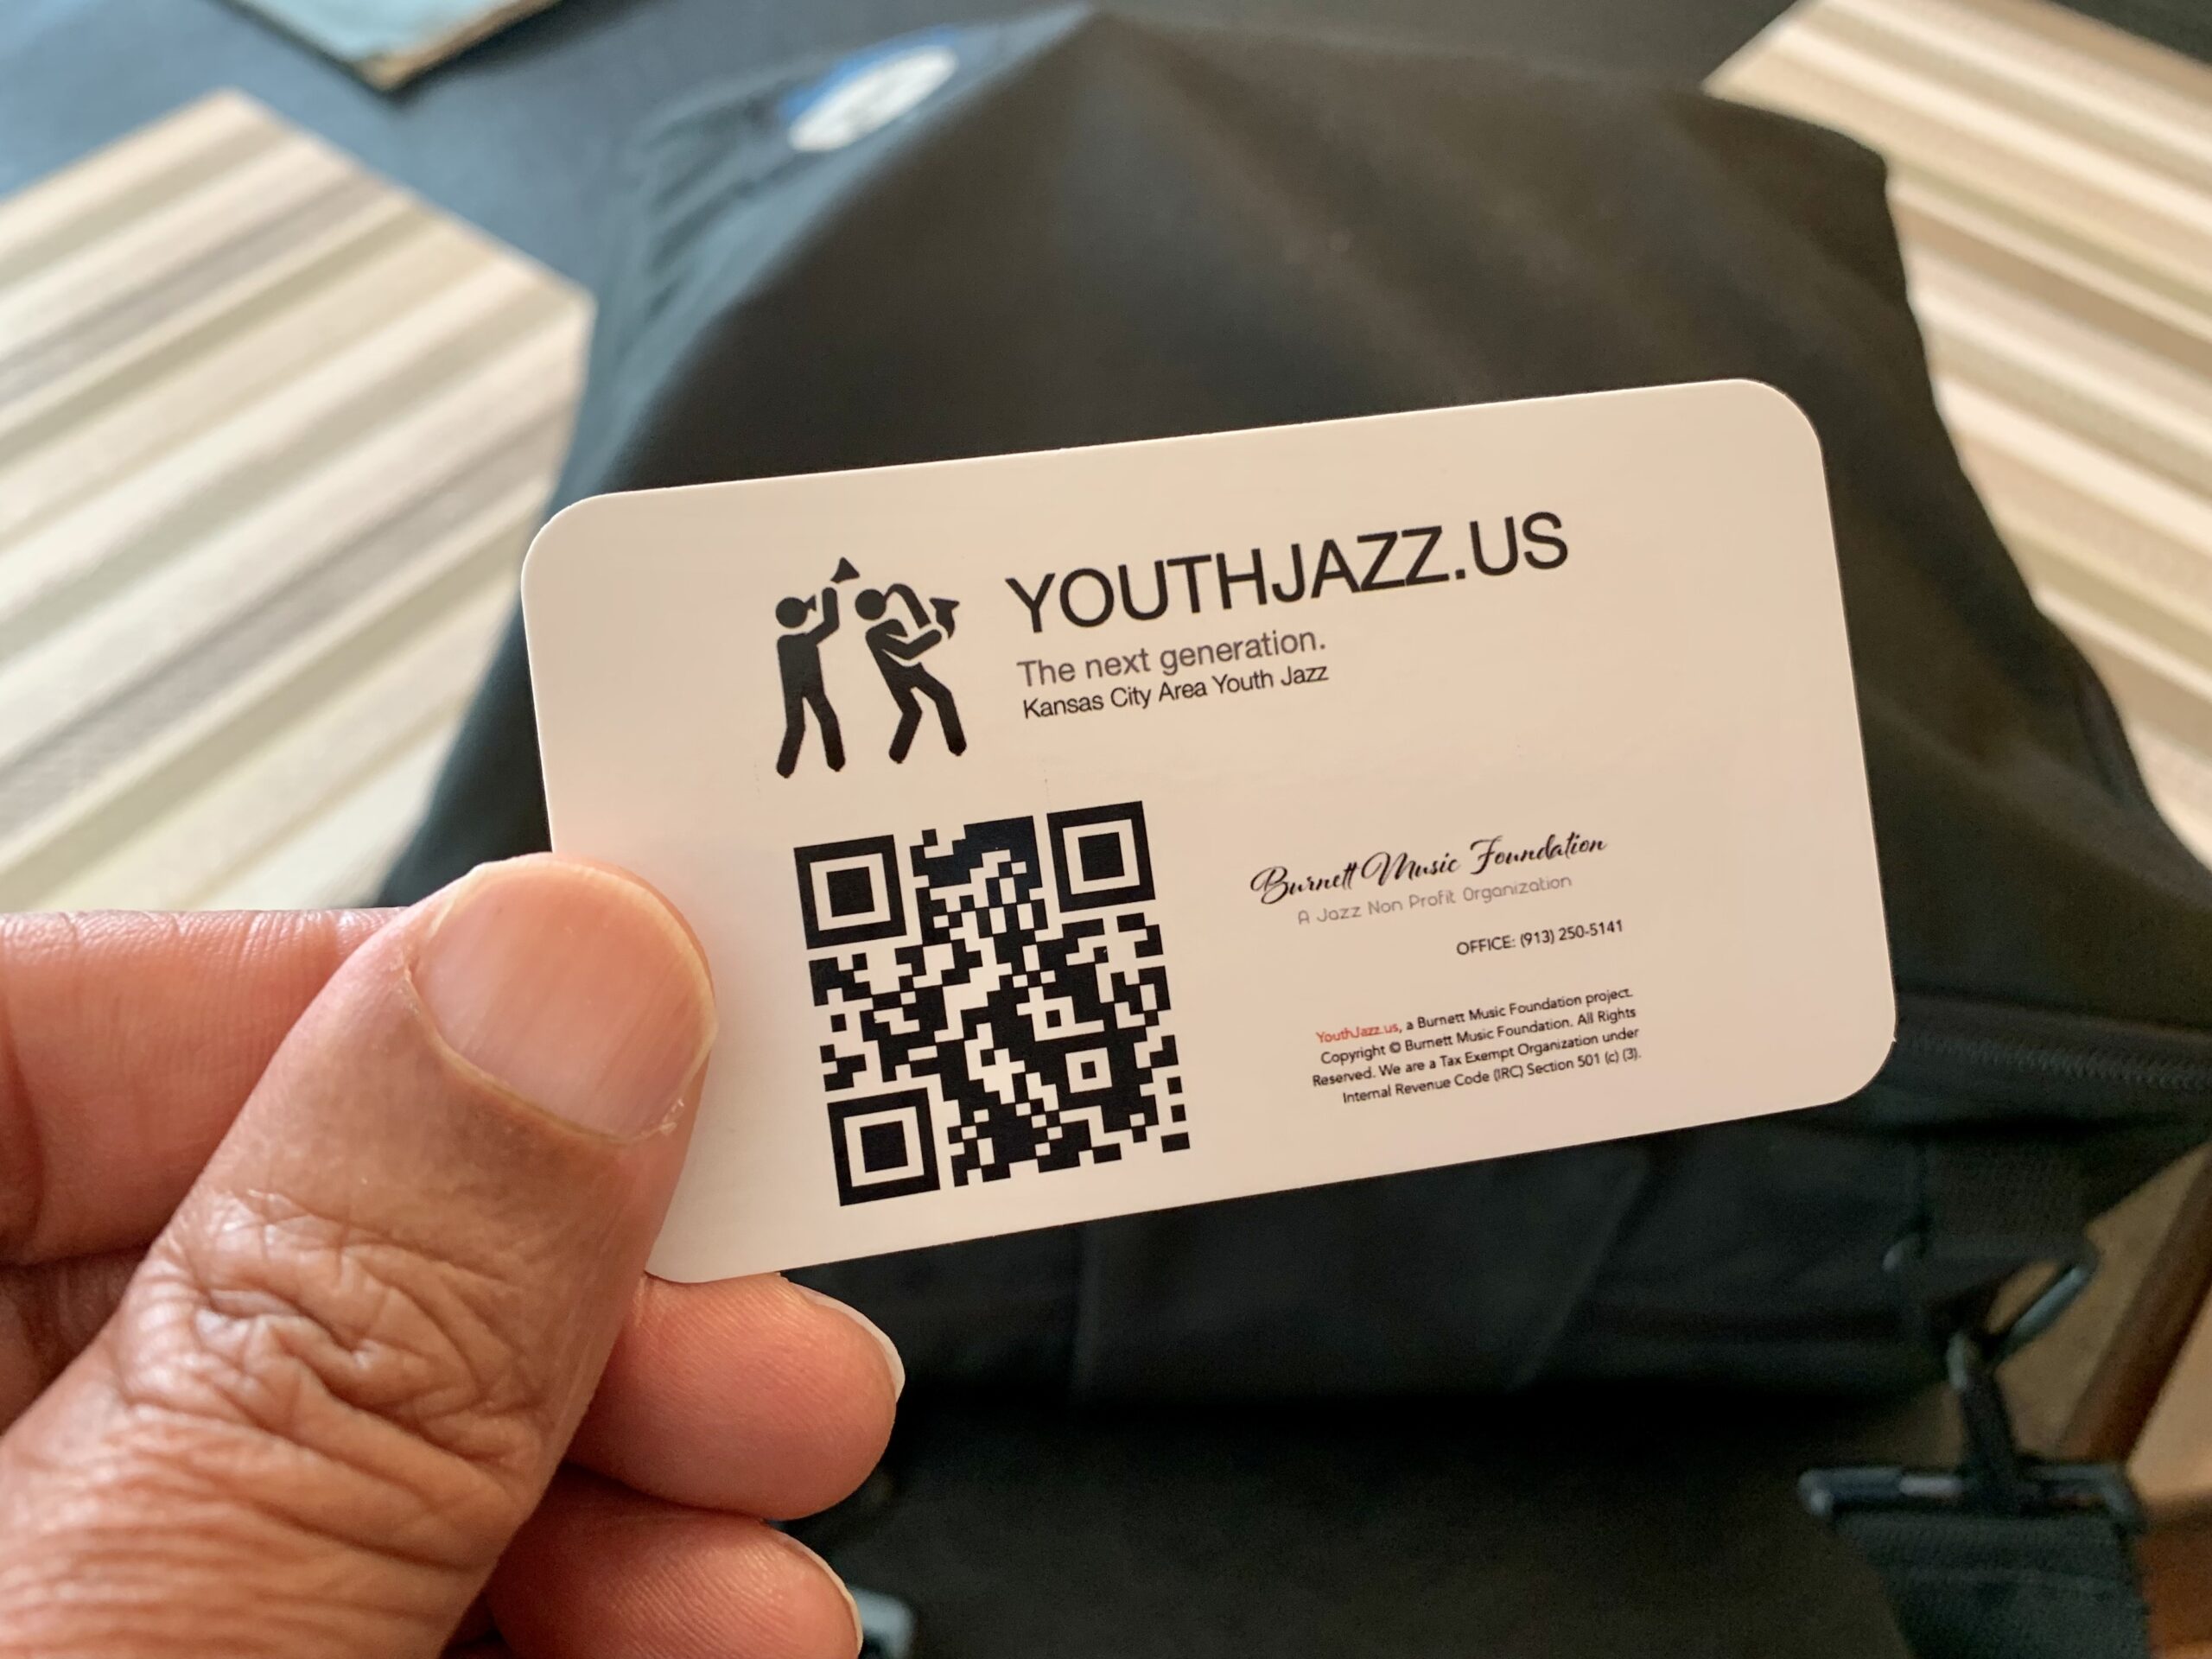 KANSAS CITY AREA YOUTH JAZZ business card photo with QR code that links to the youth jazz website